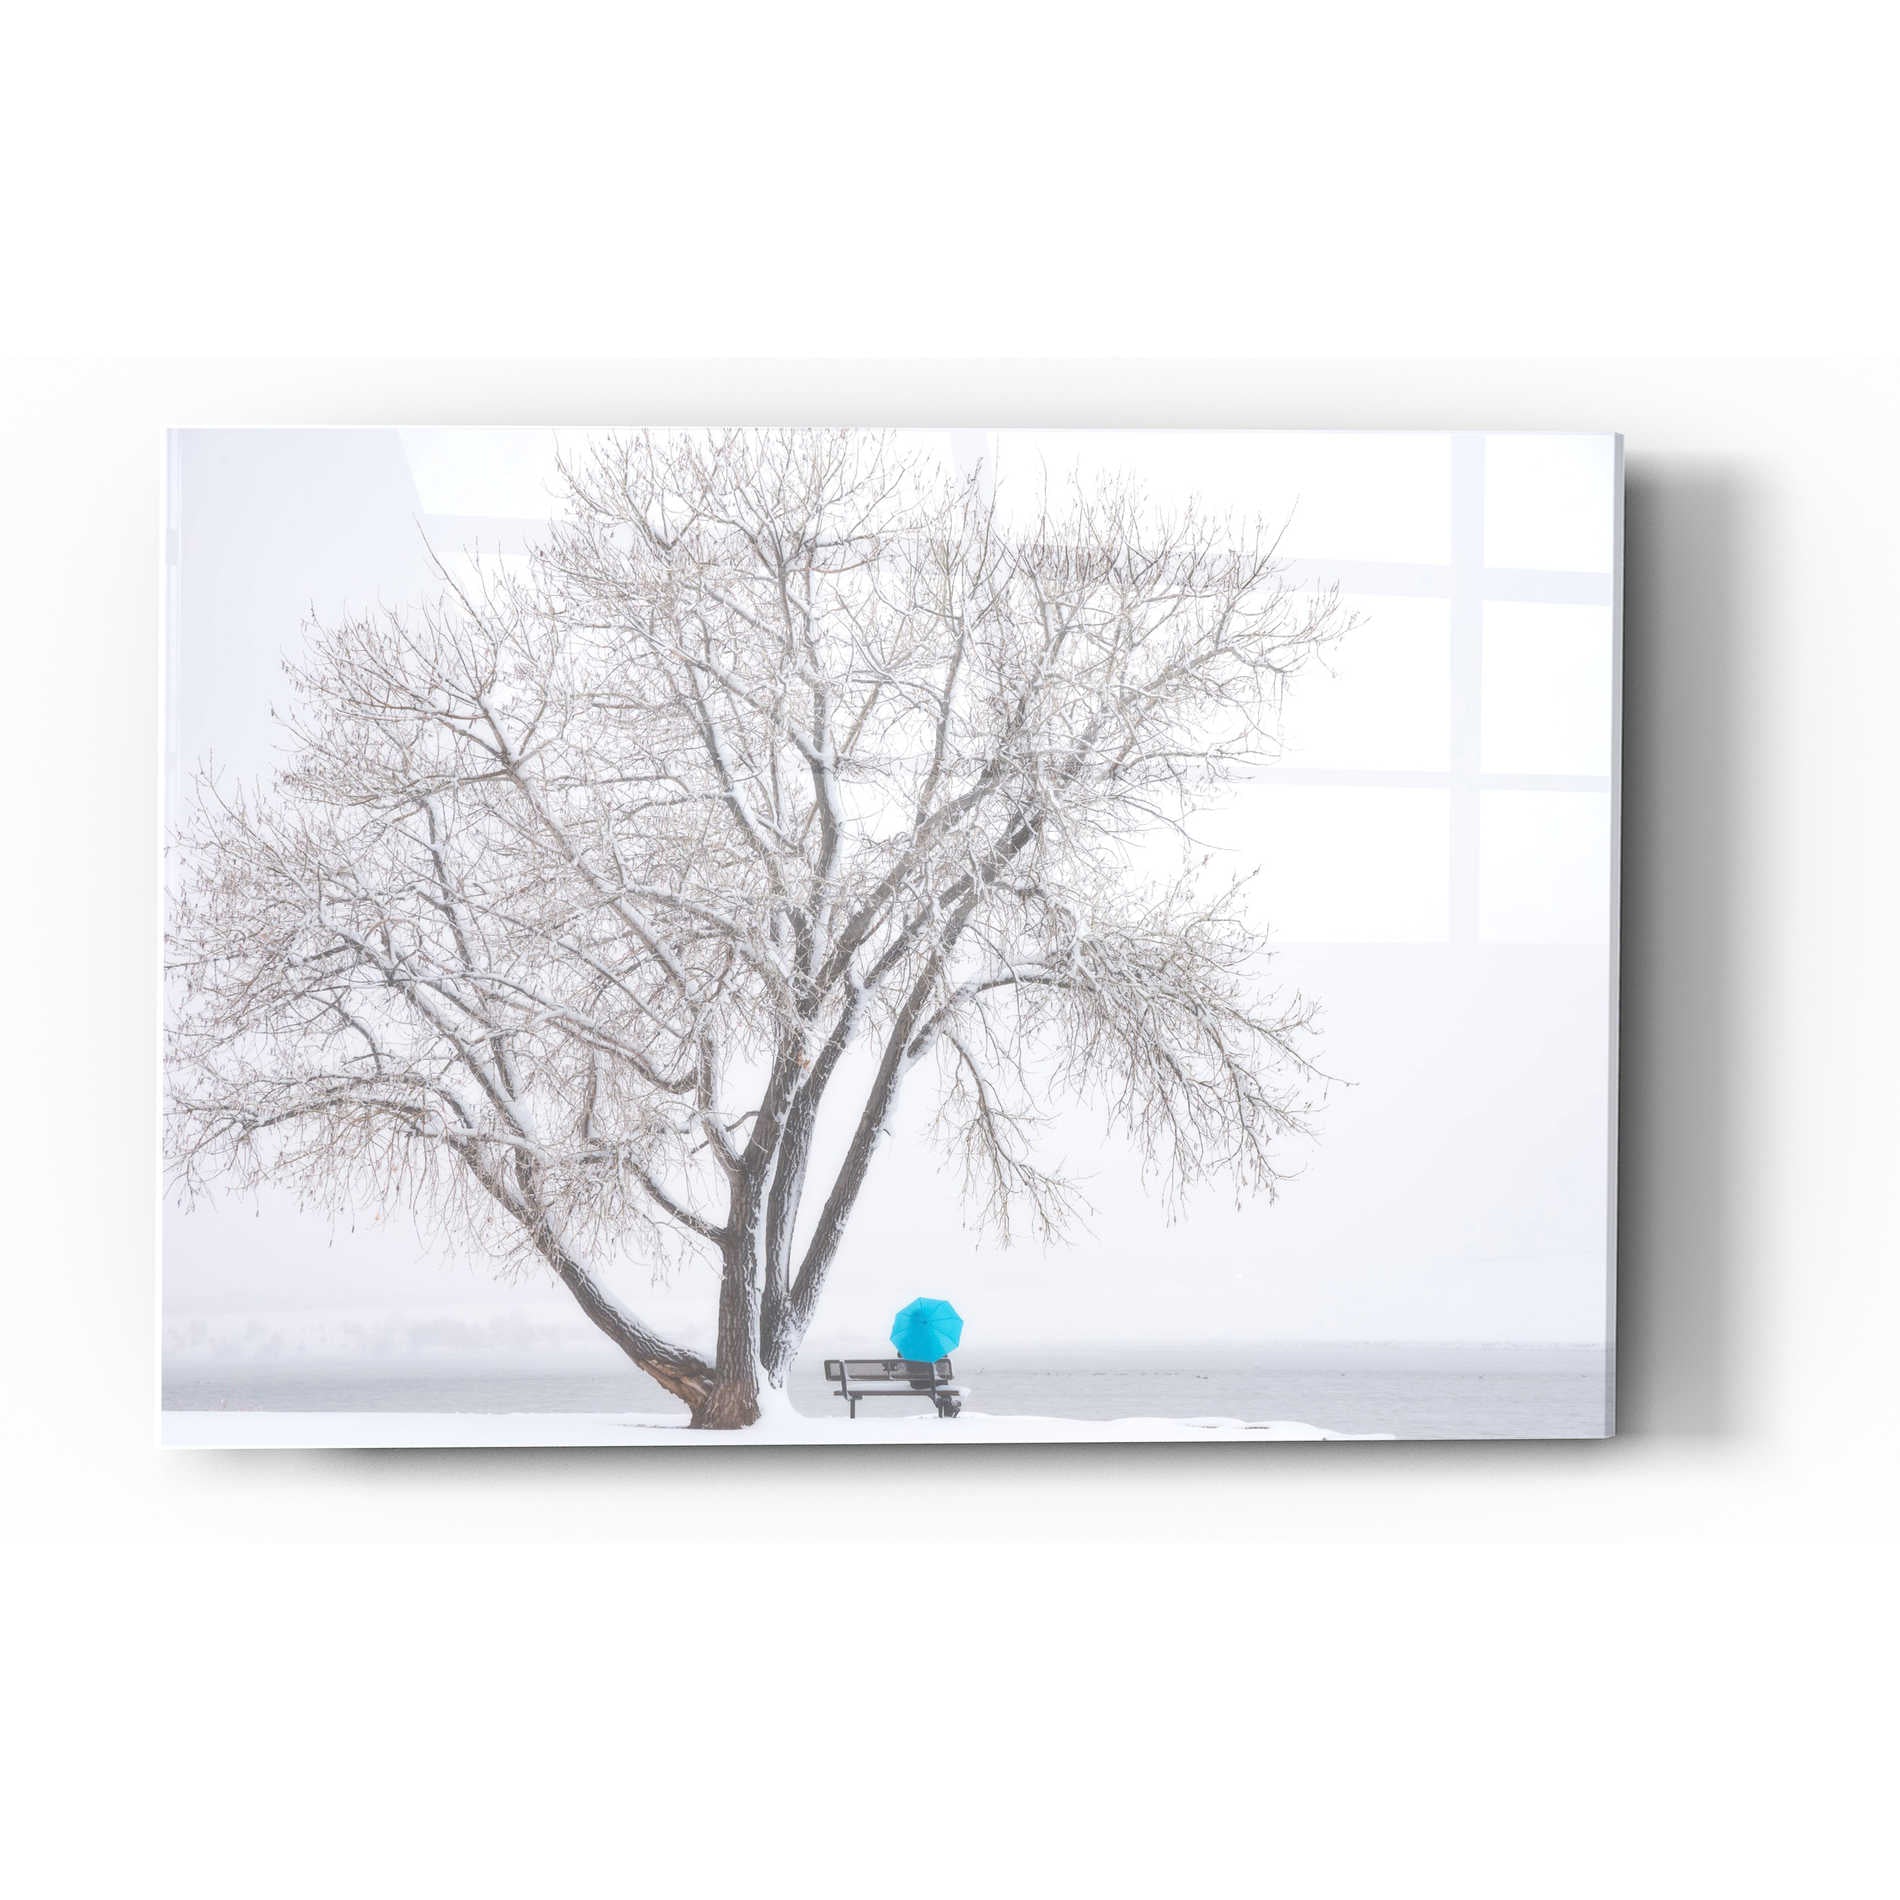 Epic Art "Another Winter Alone" by Darren White, Acrylic Glass Wall Art,24x36